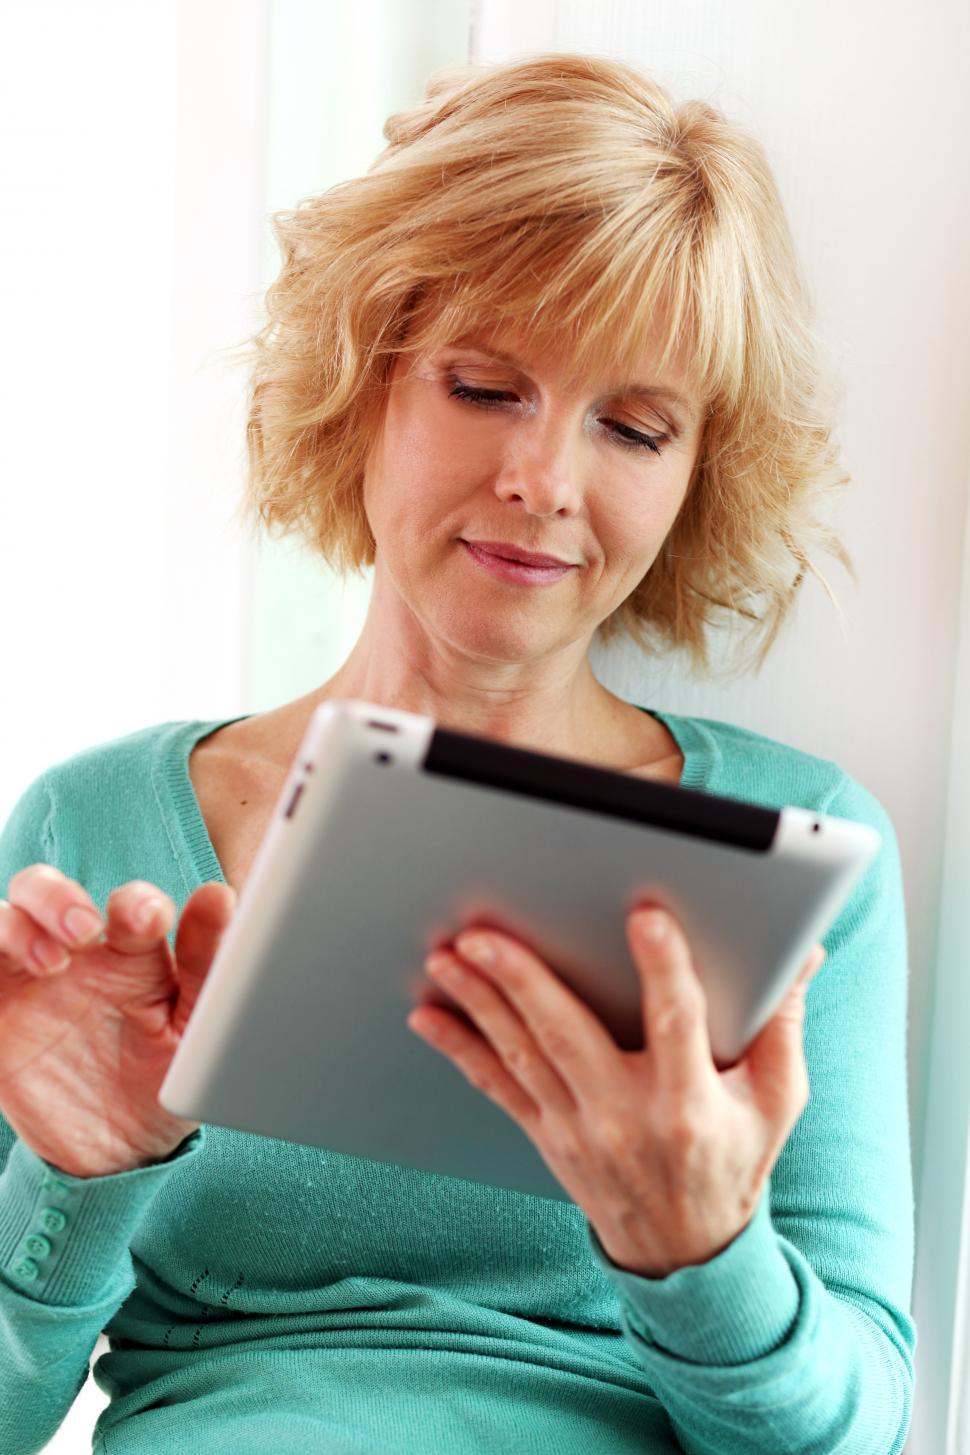 Free Image of Middle aged woman relaxing with tablet computer 